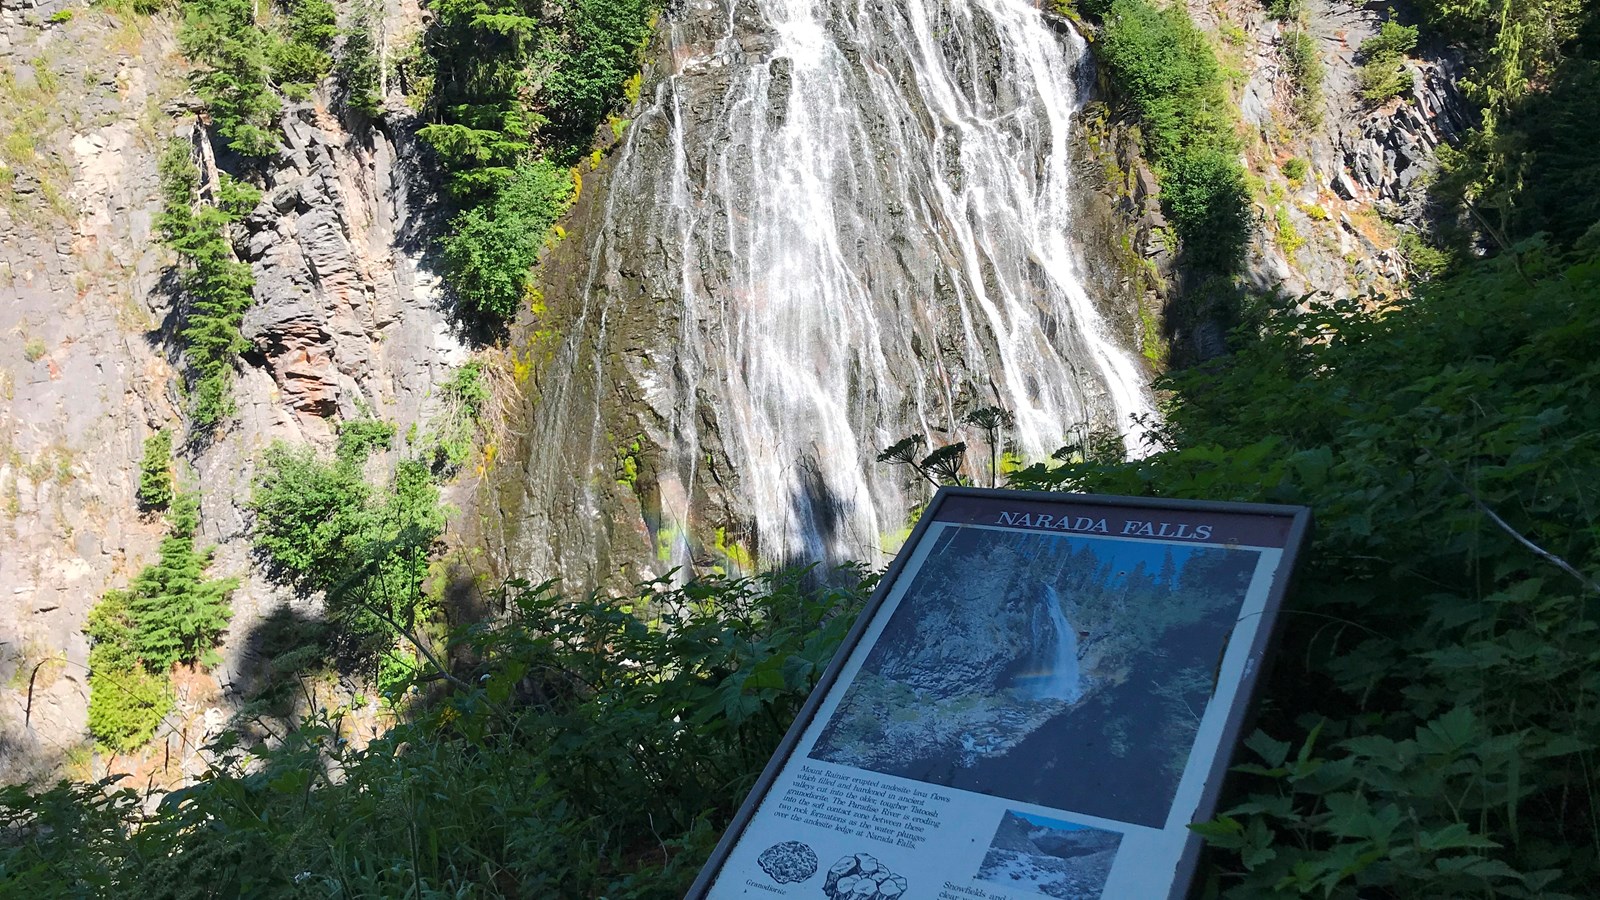 A small panel next to a fence across a narrow gorge from a wide fan-shaped waterfall.